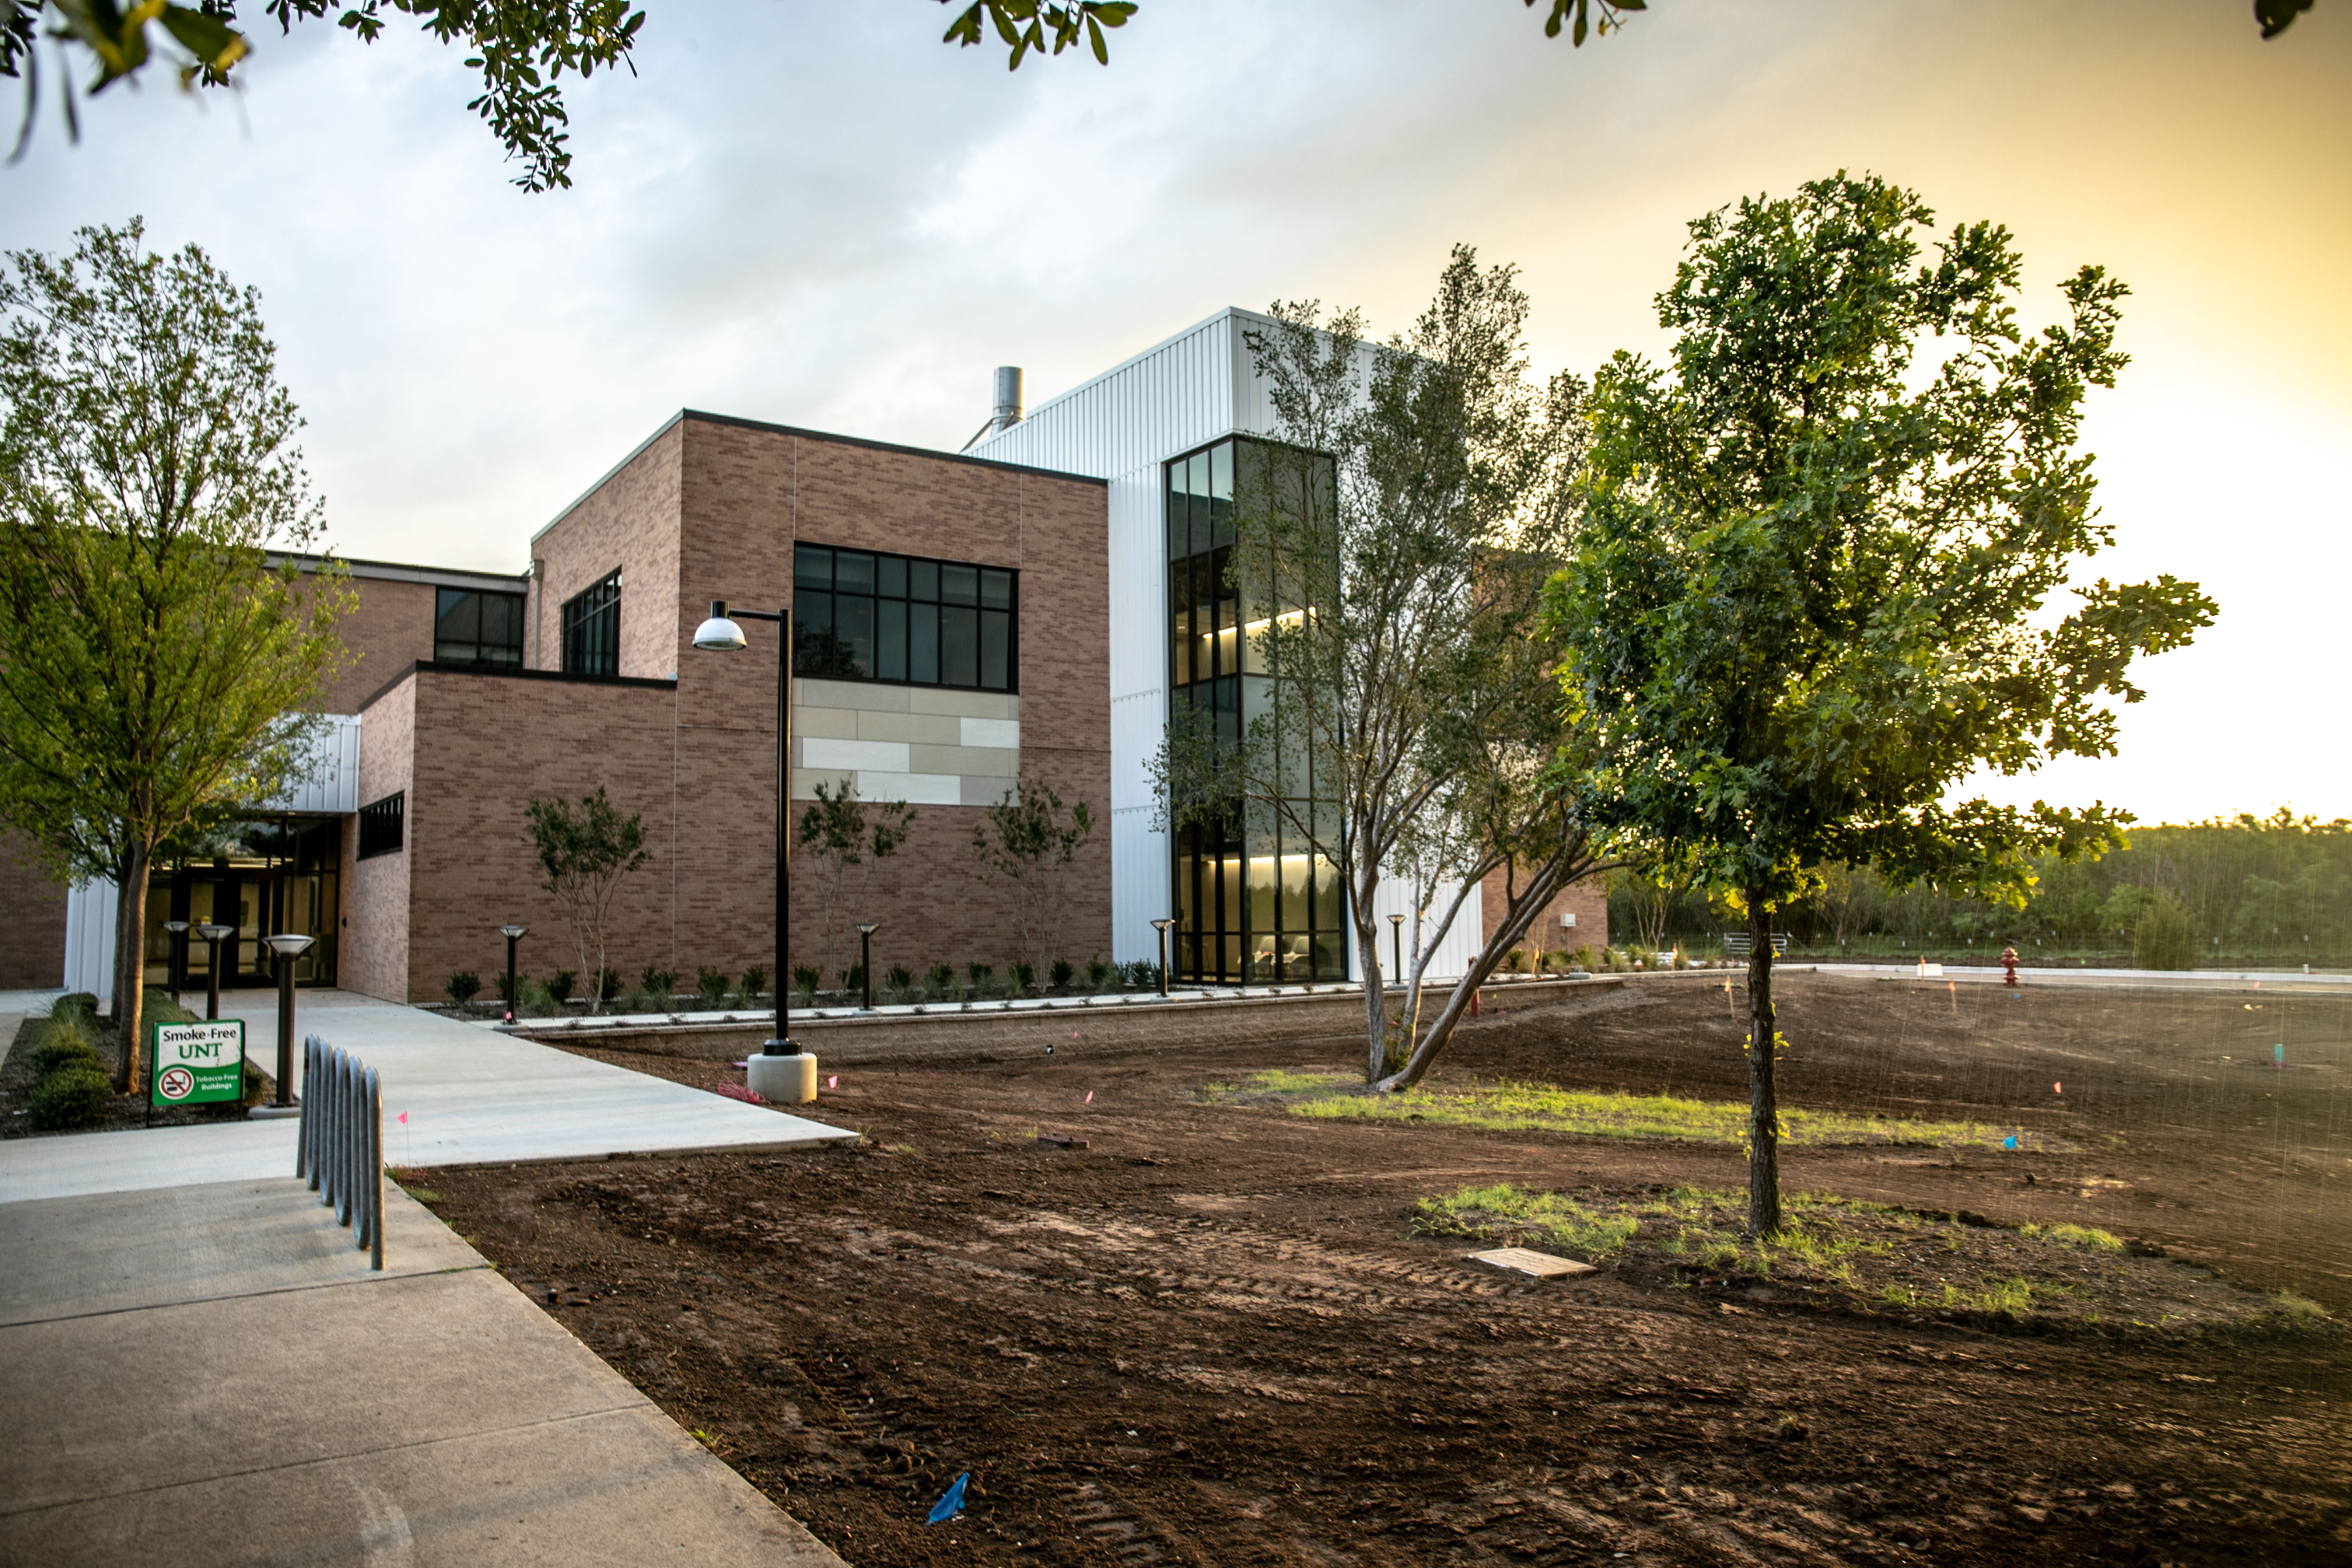 The new facilities have allowed UNT to recruit new faculty and students to its growing biomedical engineering program. Four new full-time faculty are joining the department this fall, bringing with them a range of expertise from neuroelectronics to electrophysiology. 